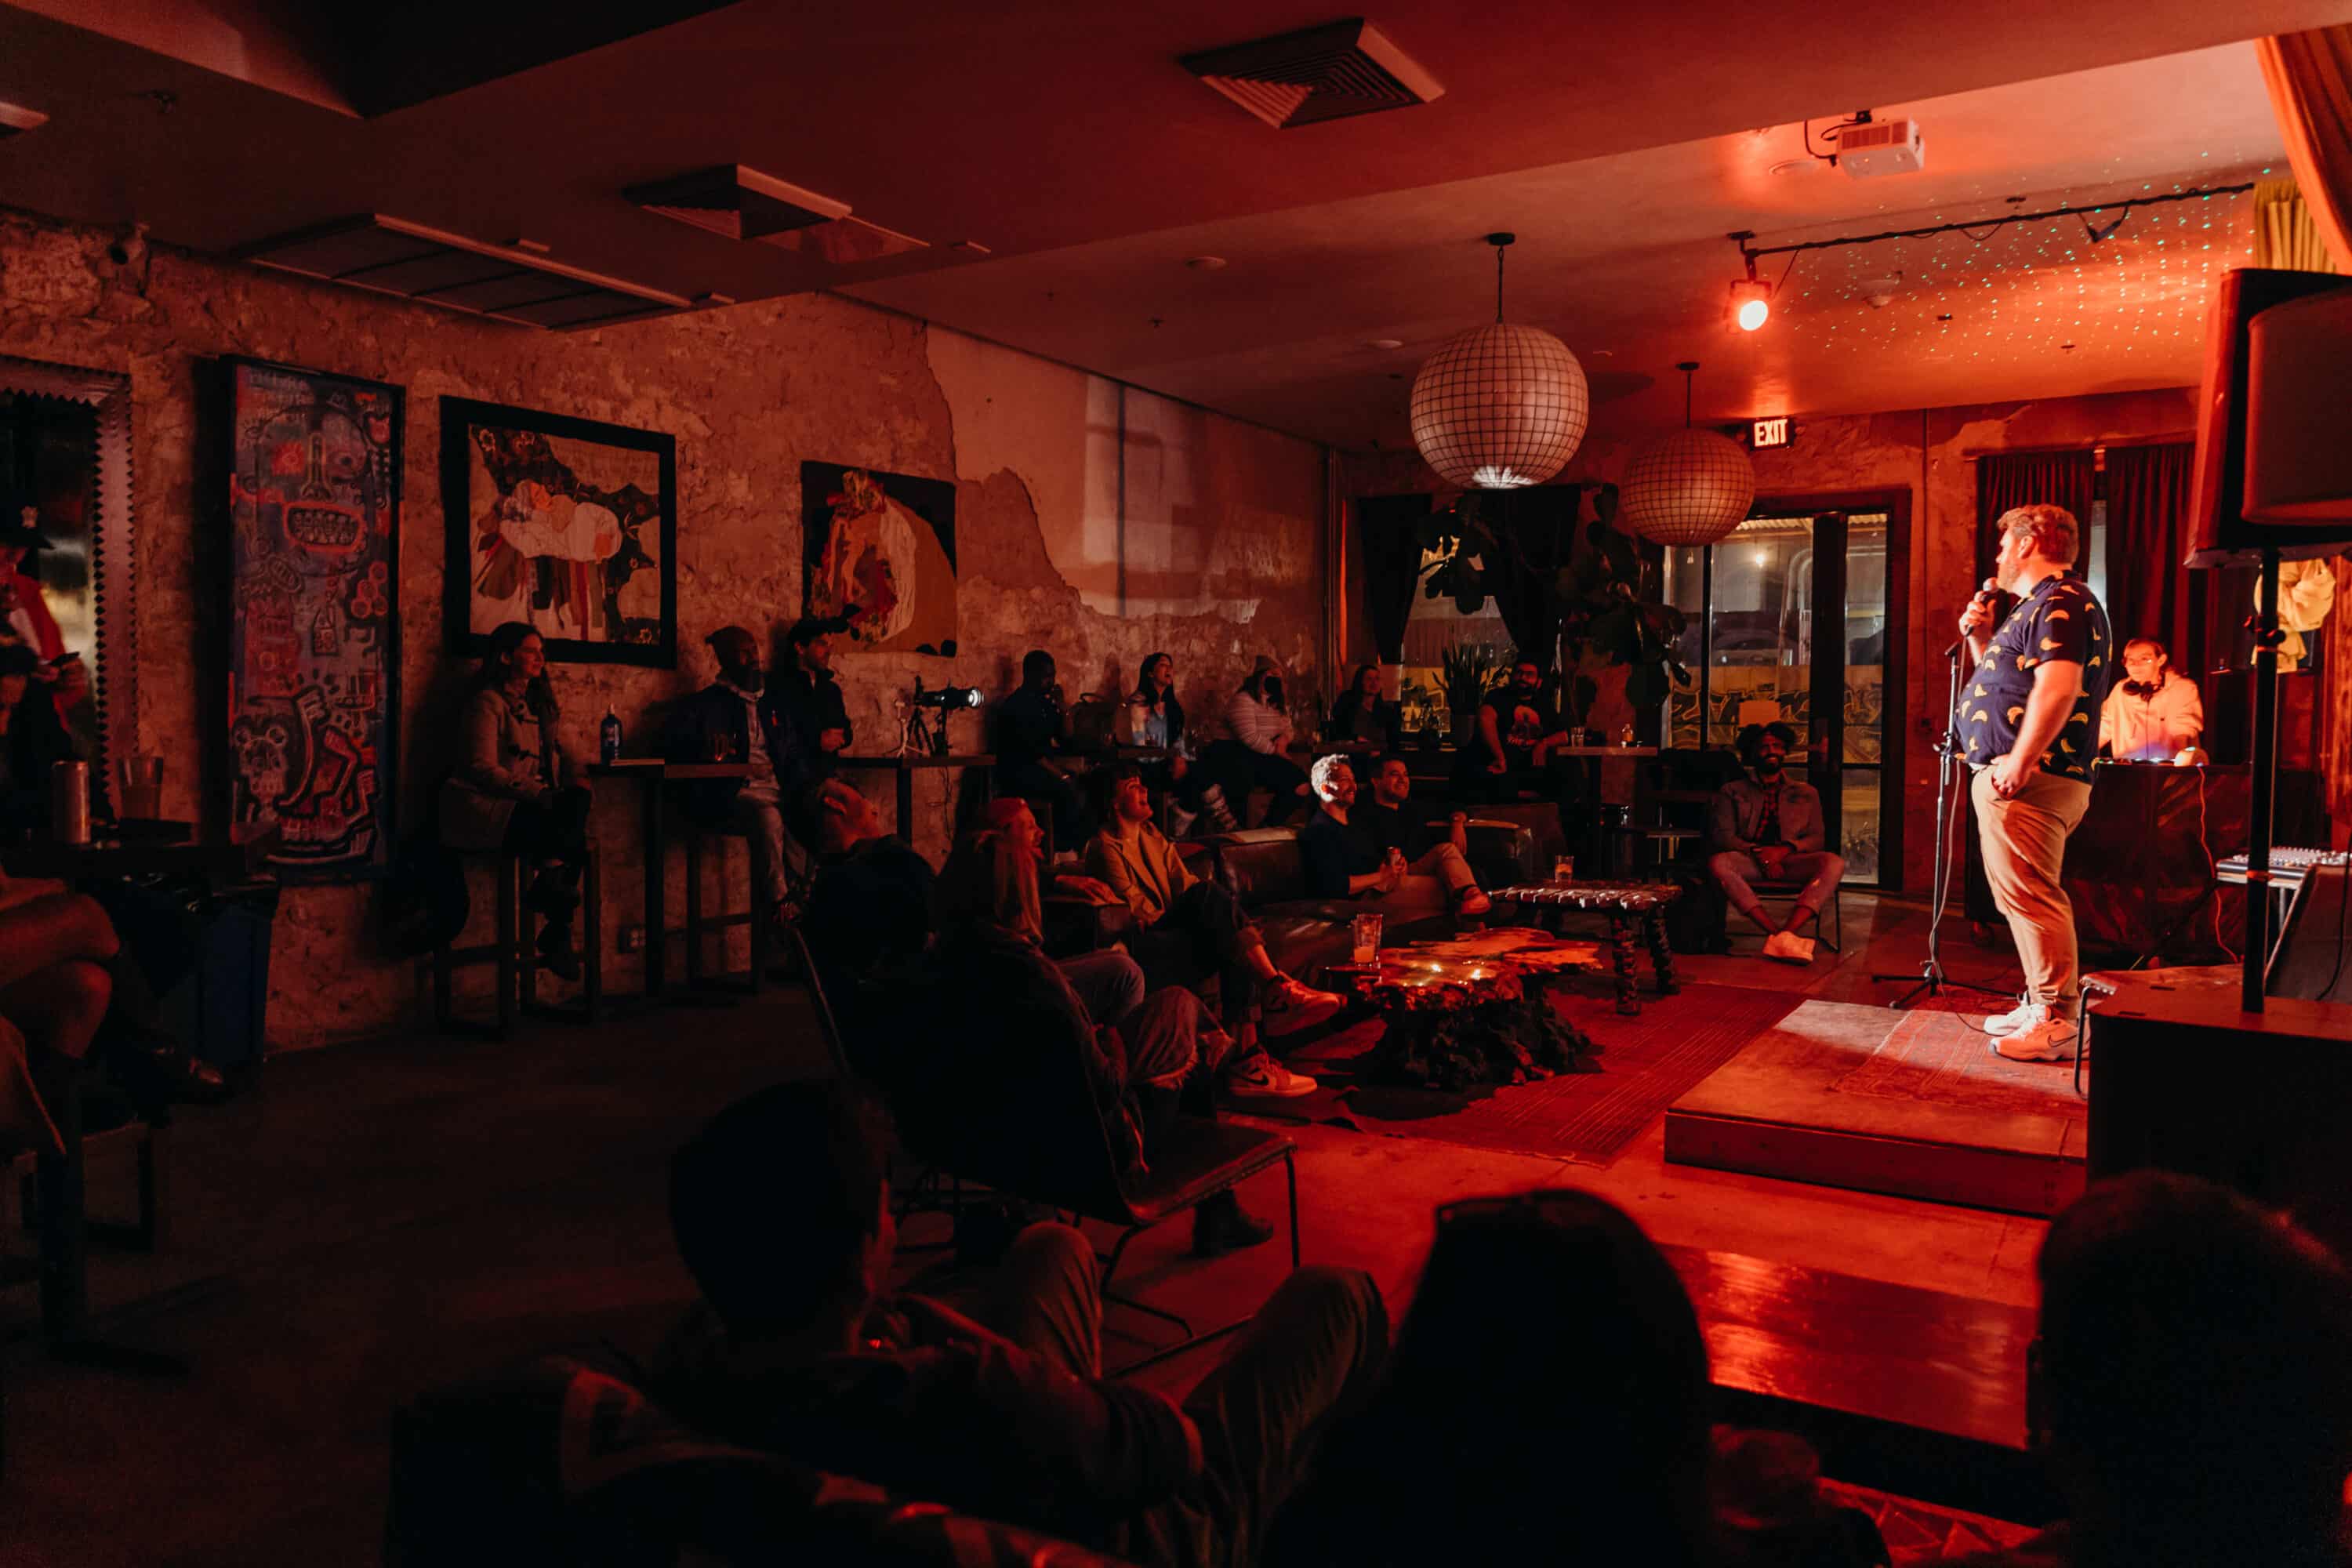 East Austin Comedy Show | Why Austin Is a Great Place for Your Business